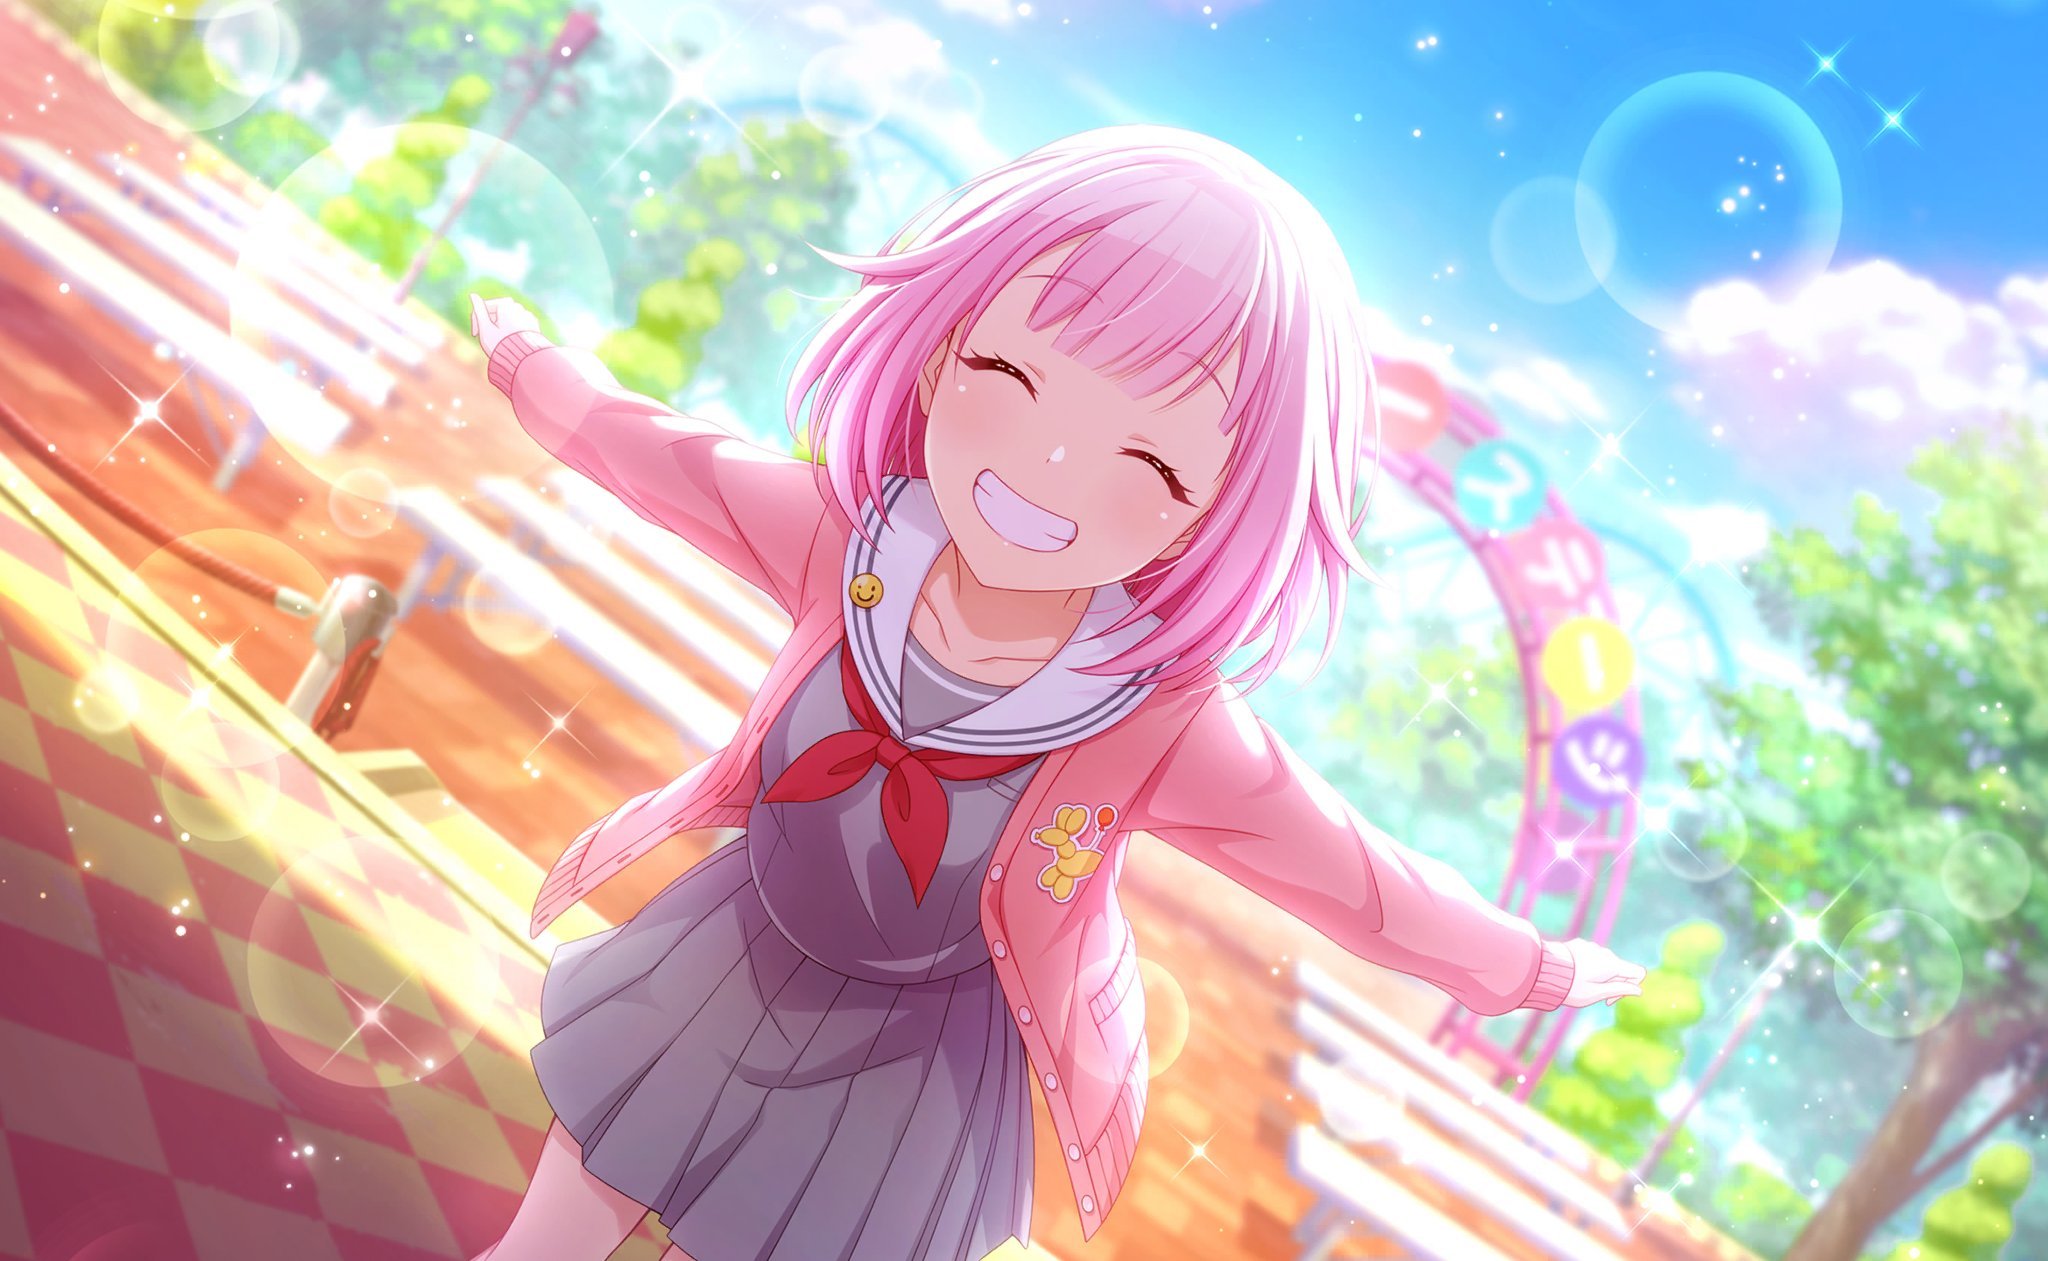 Project Sekai ENG (Unofficial) - [An Irreplaceable Smile] Gacha 4 Otori Emu [Limited] Type: Mysterious Max Stats: Performance Technique Stamina Max Skill: I'll be Okay